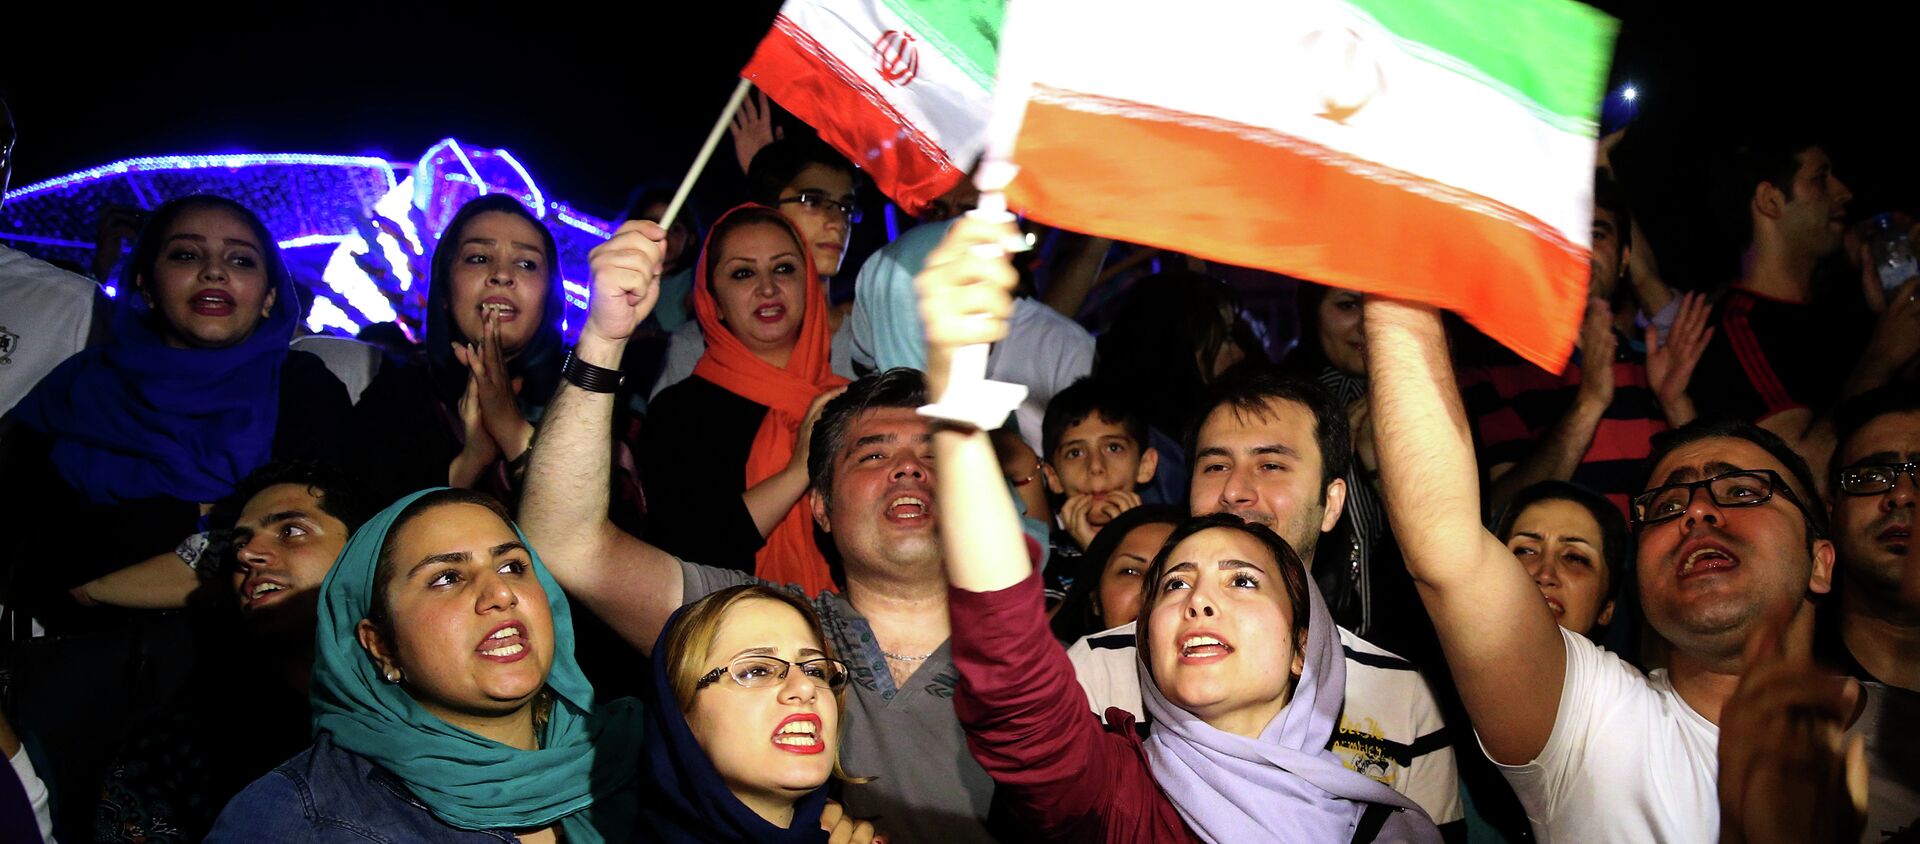 Jubilant Iranians sing and wave Iran flags during street celebrations following a landmark nuclear deal, in Tehran, Iran, Tuesday, July 14, 2015 - Sputnik Afrique, 1920, 31.05.2021